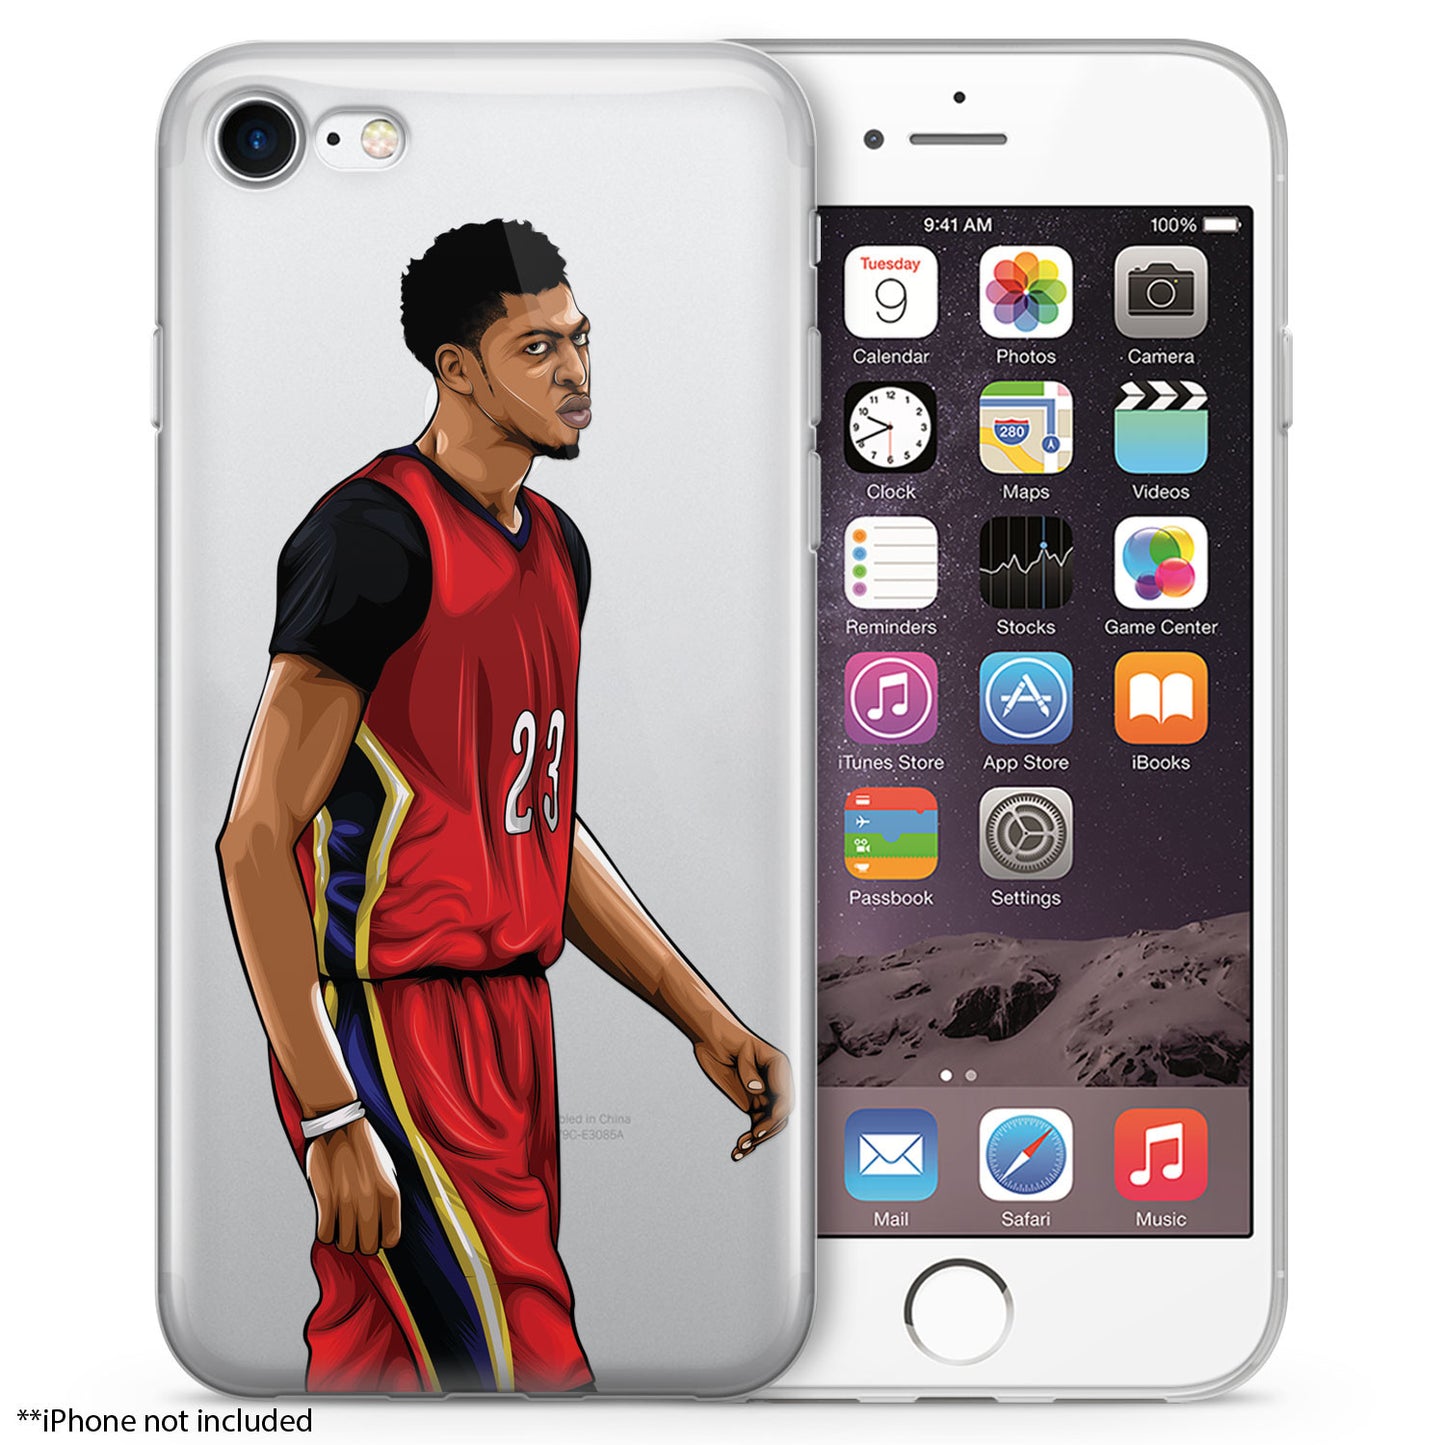 The-Brow Basketball iPhone Case